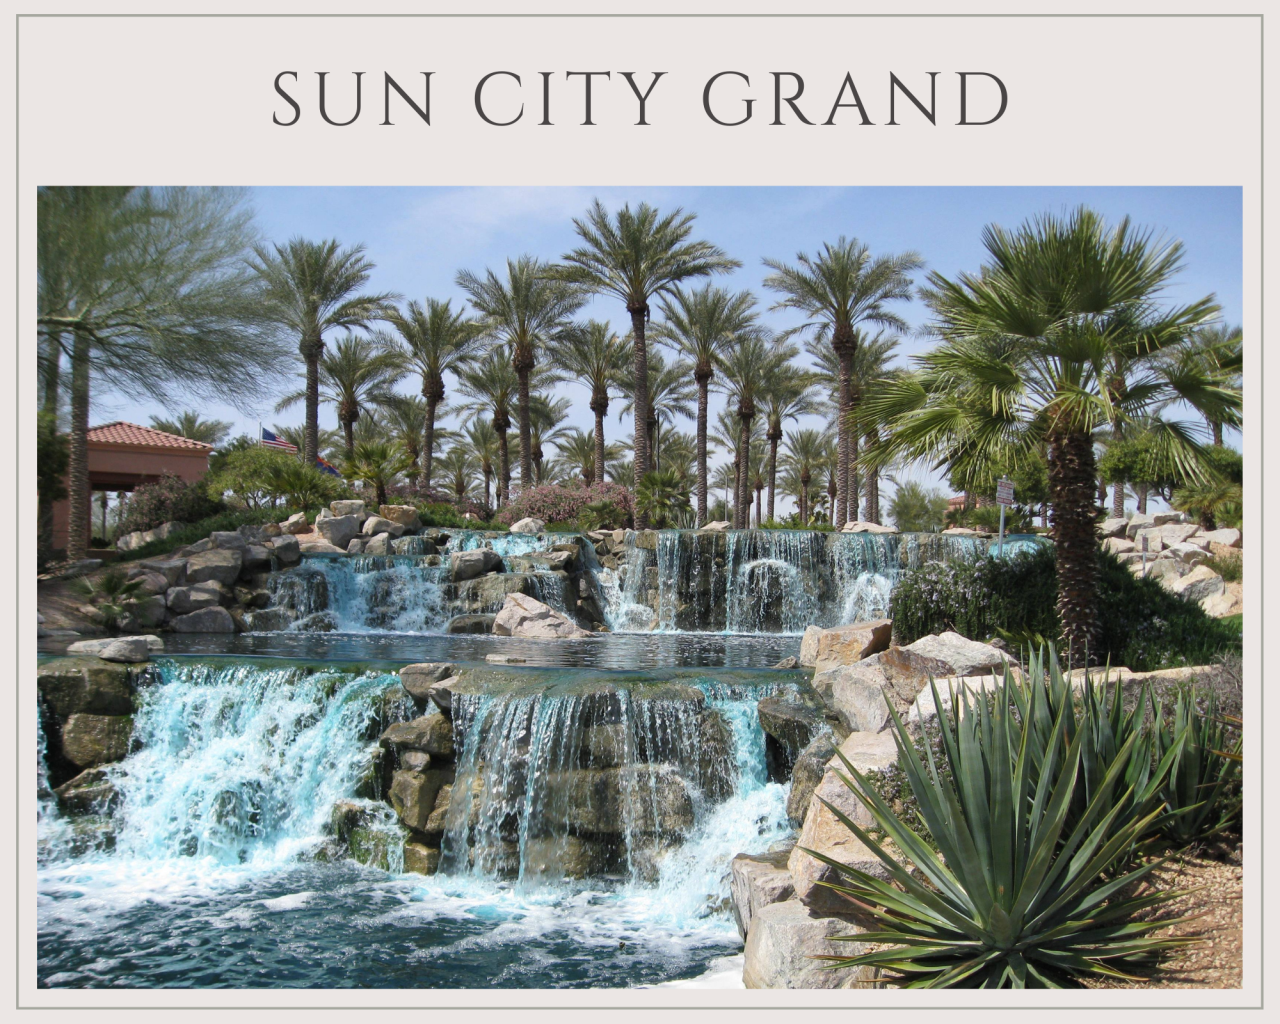 Sun City Grand Surprise Arizona resales real estate and homes for sale MLS listings